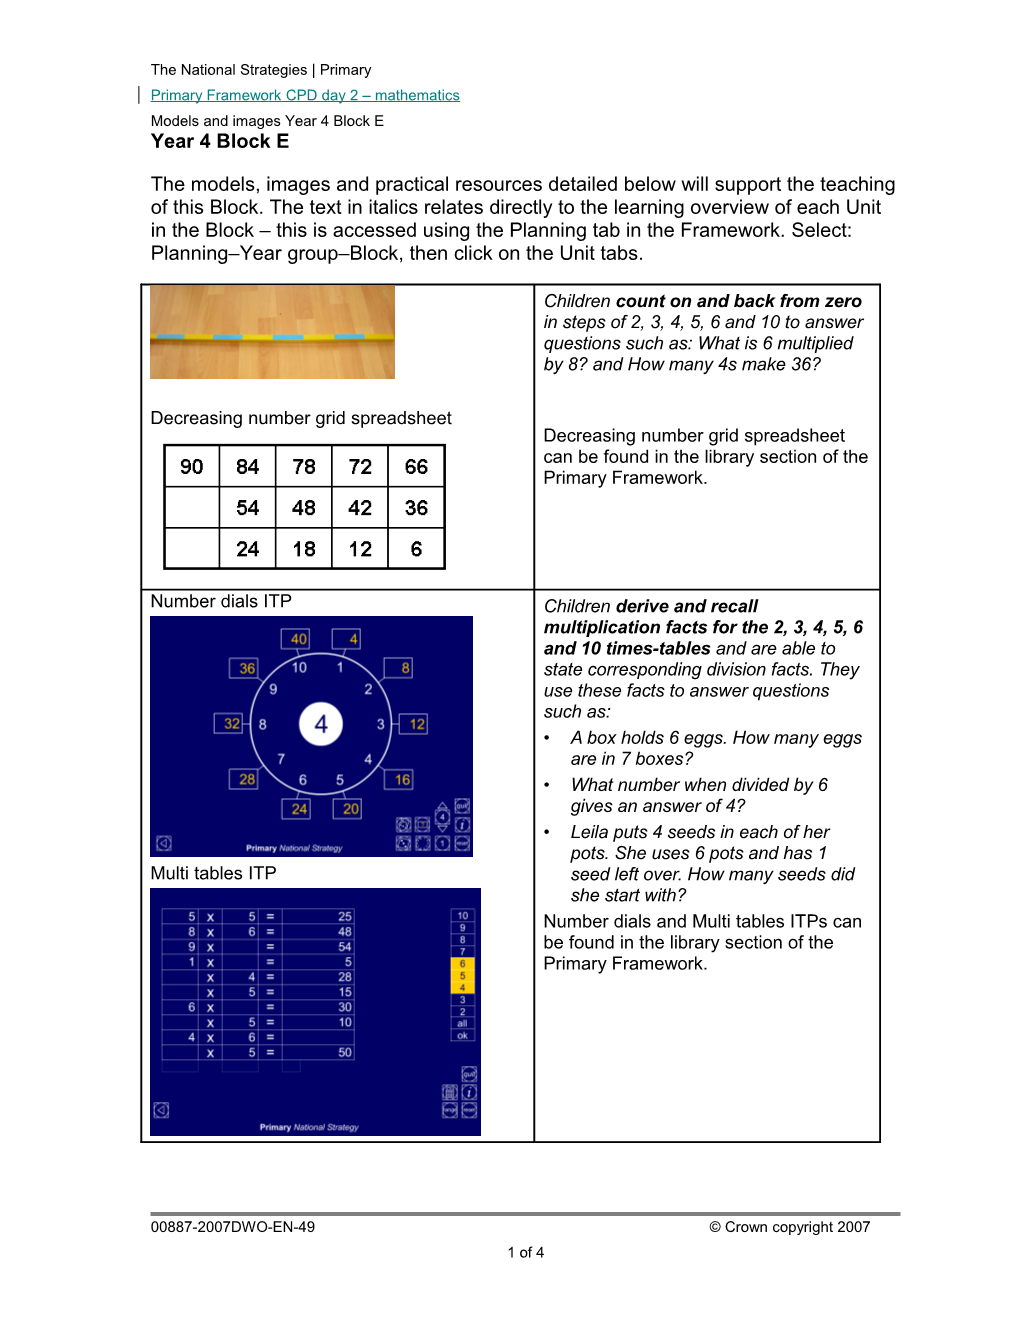 CPD2 Maths Models and Images Year 4 Block E